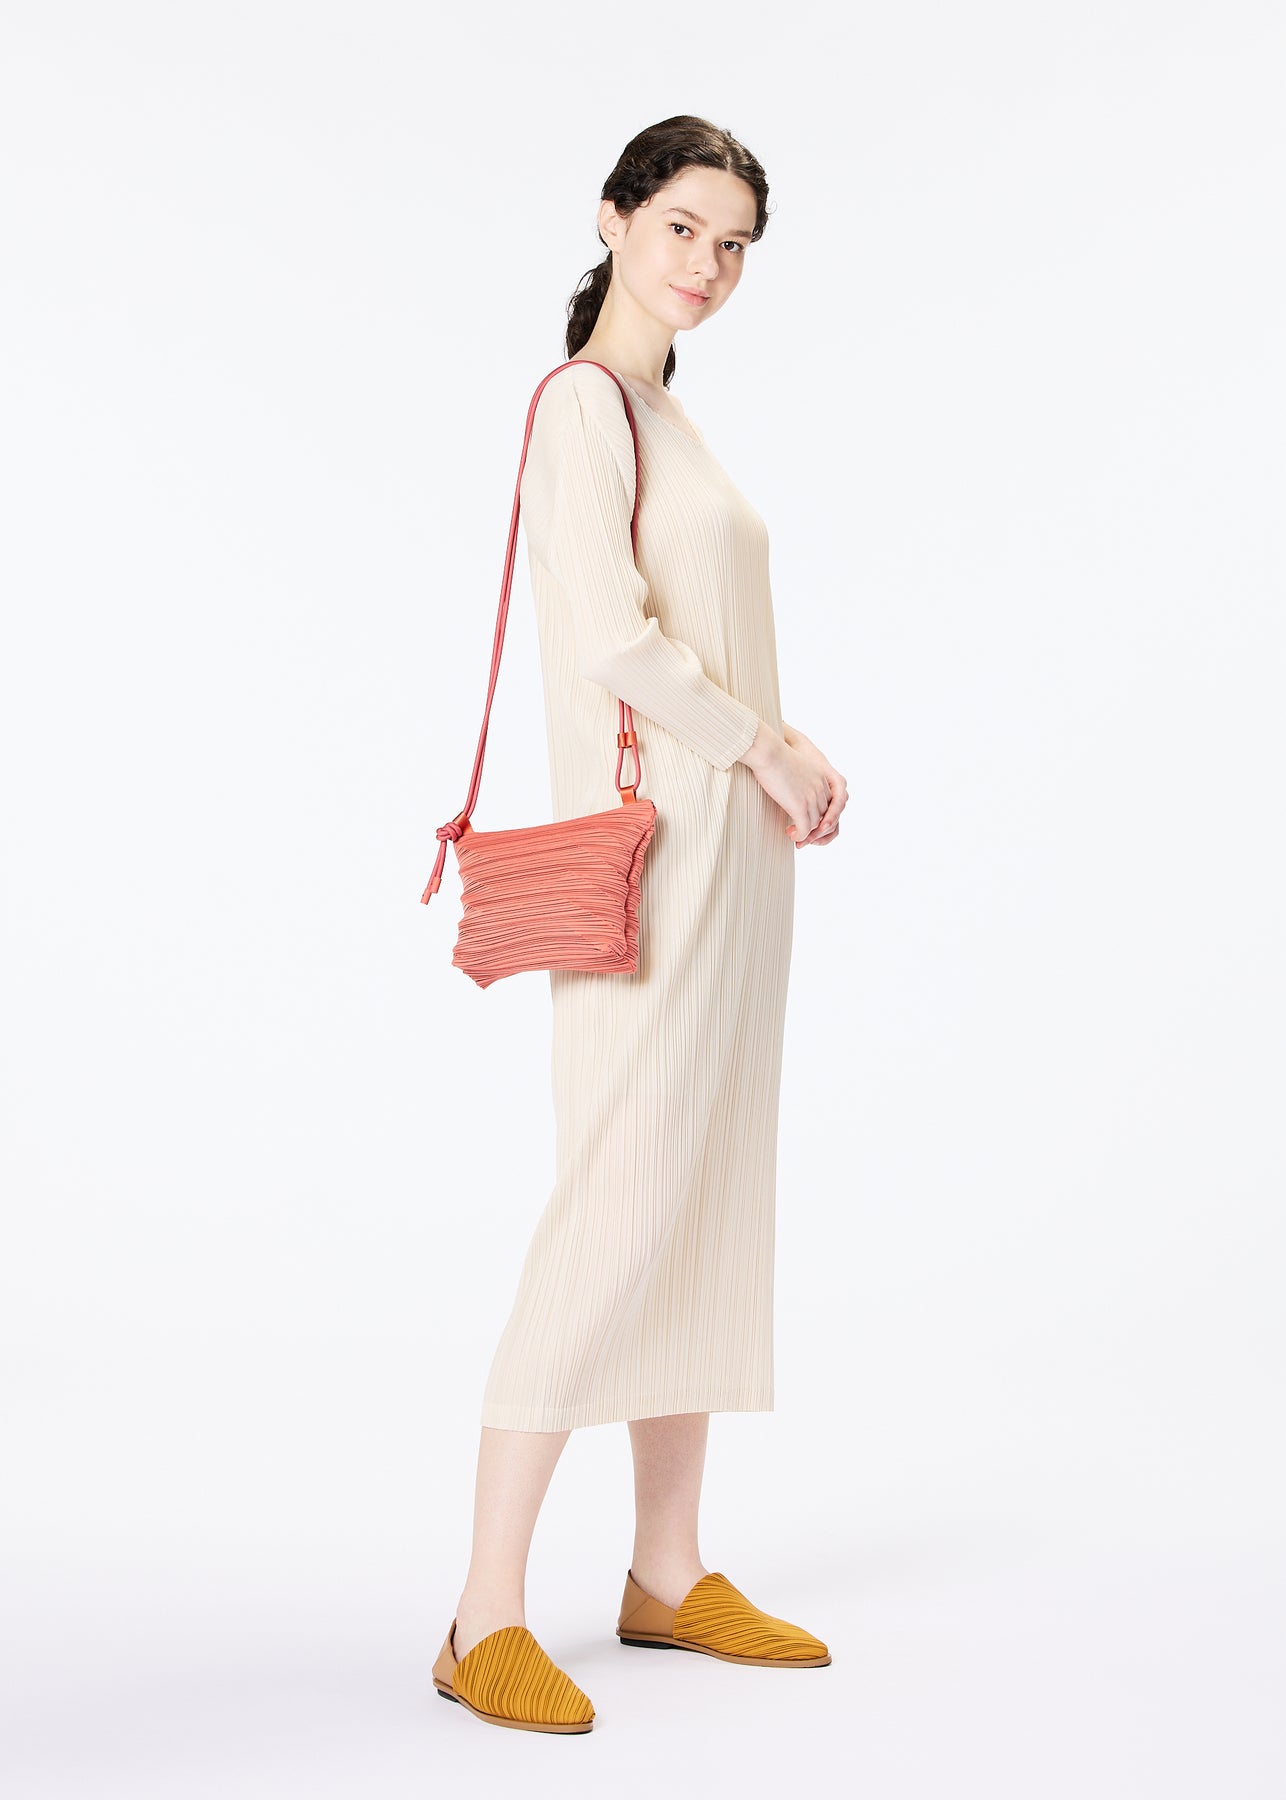 PATAPATA PLEATS BAG | The official ISSEY MIYAKE ONLINE STORE